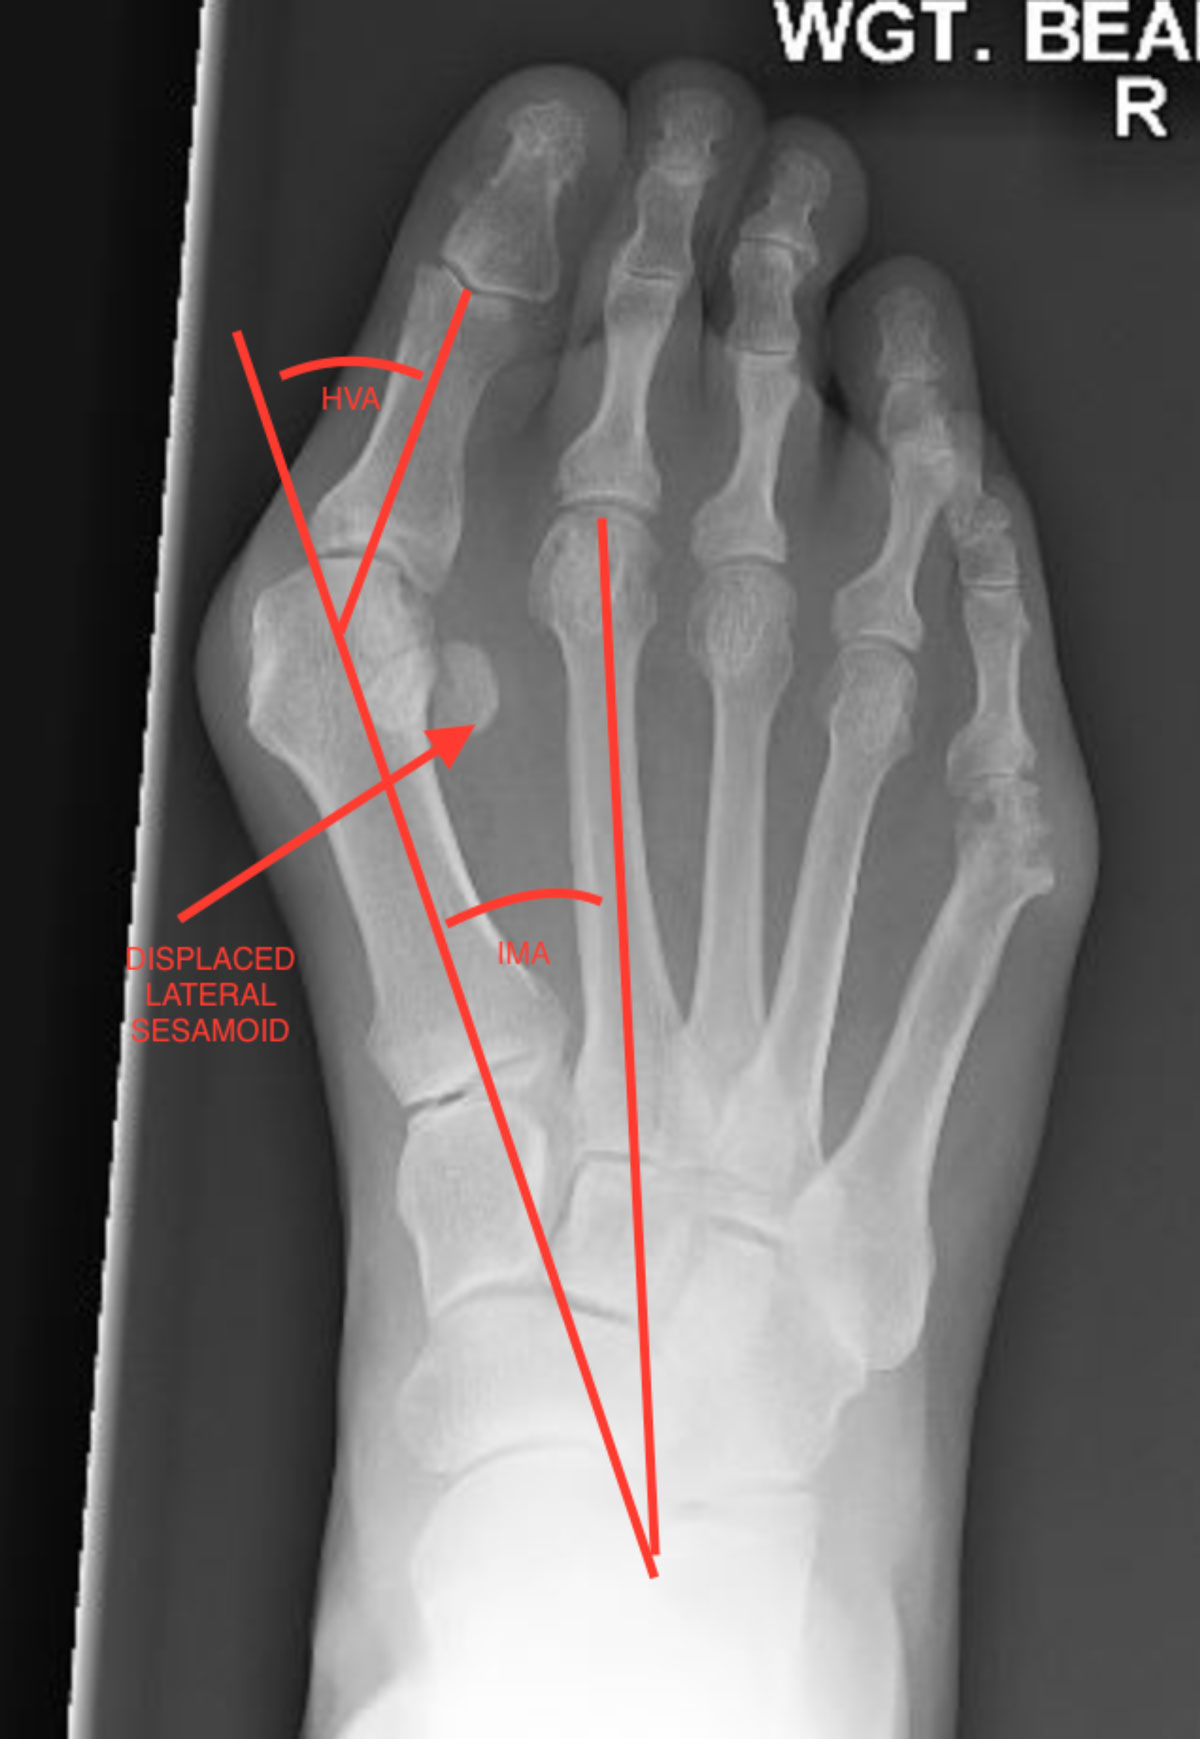 Weight bearing x-rays are used to accurately assess deformity in bunions.